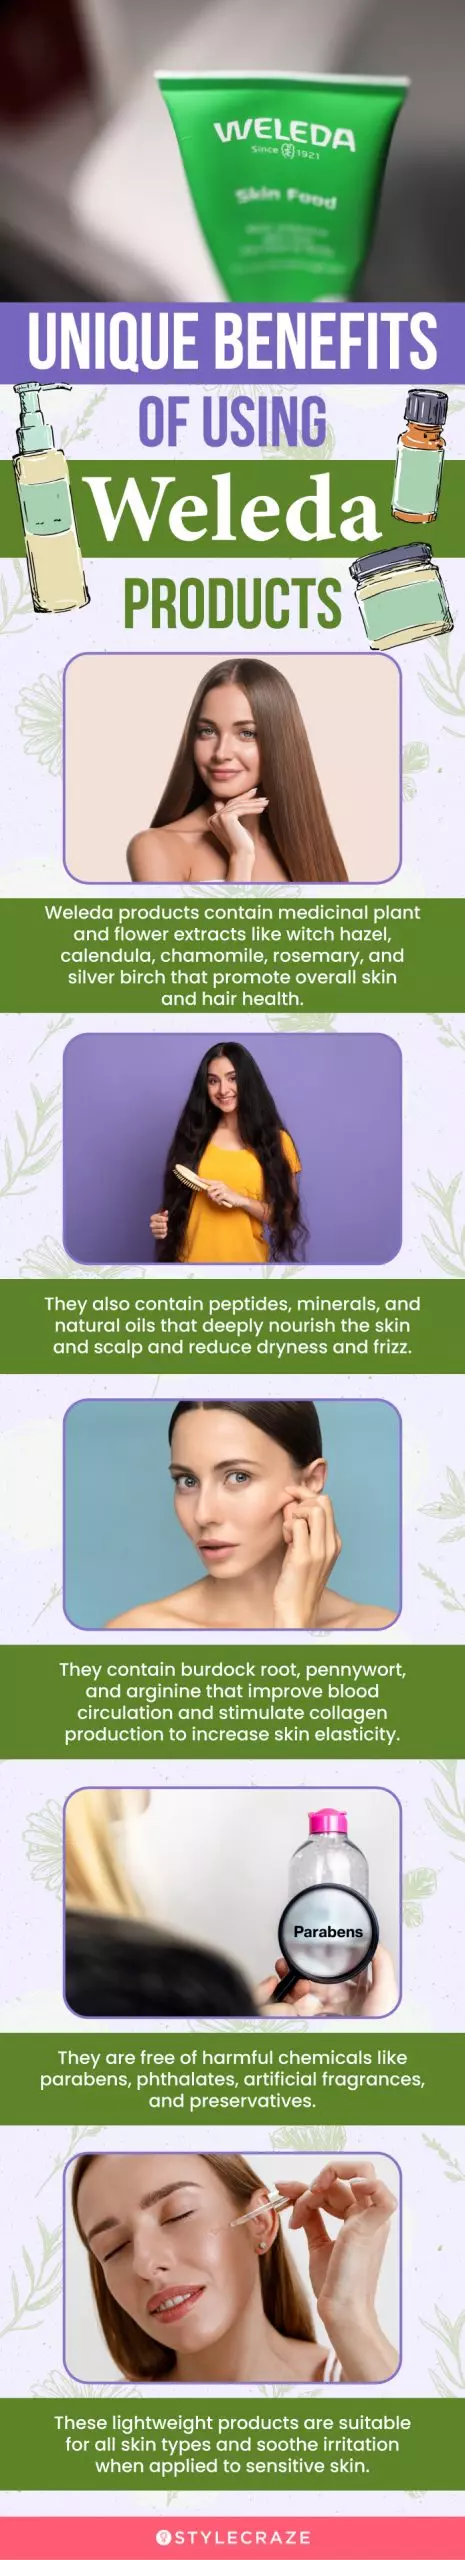 Unique Benefits Of Using Weleda Products(infographic)